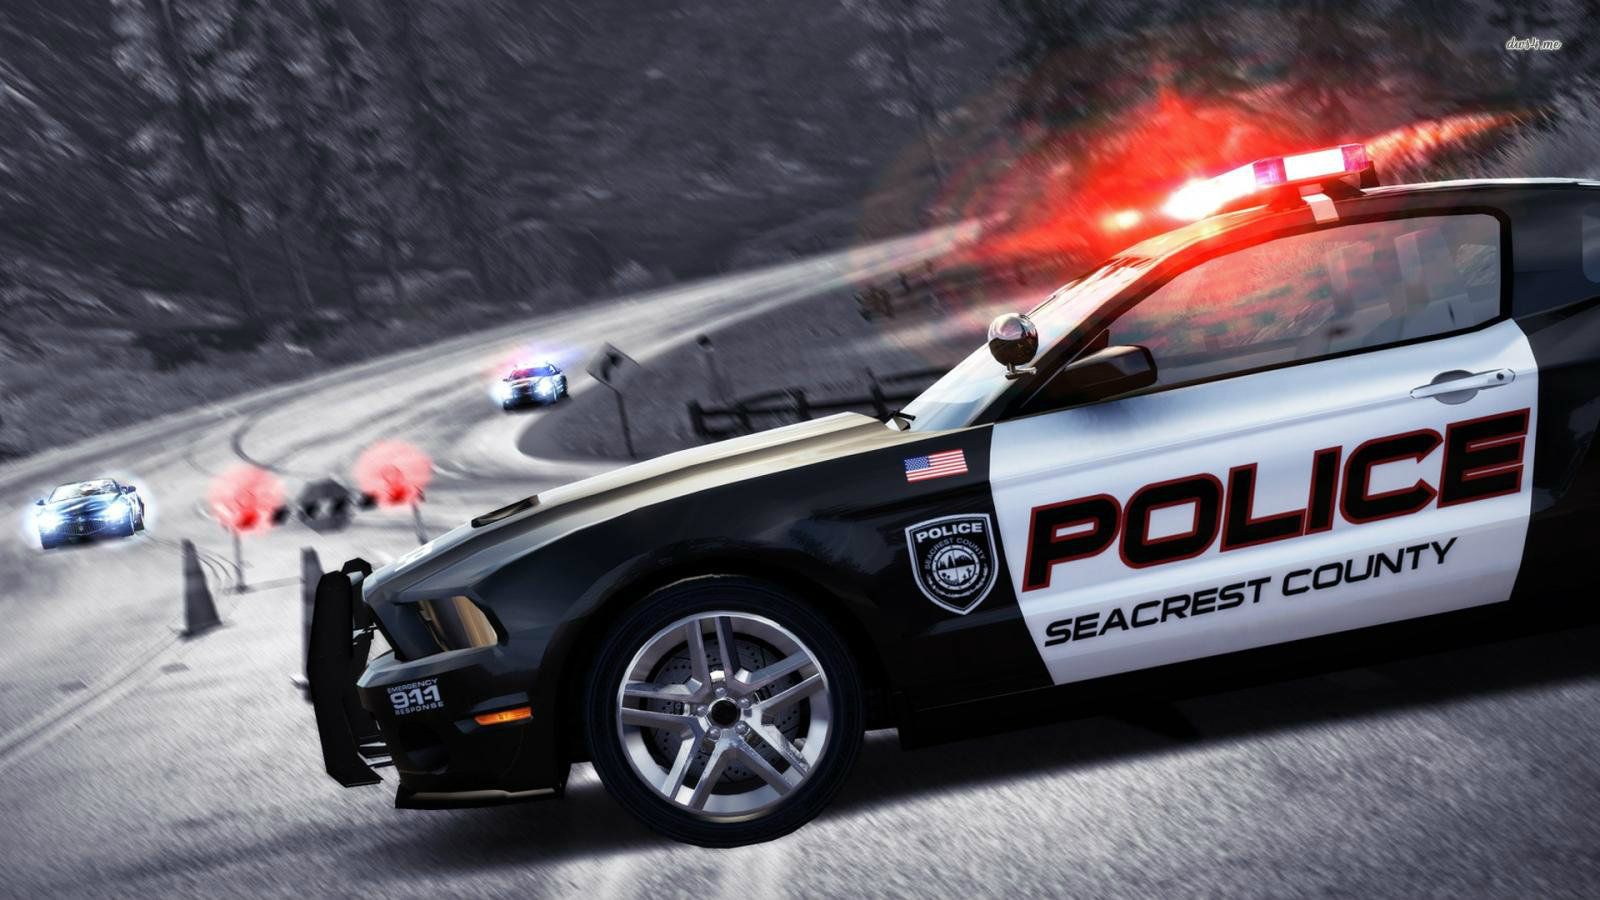 The Police Wallpaper. Police Car Wallpaper, The Police Wallpaper and Police Wallpaper